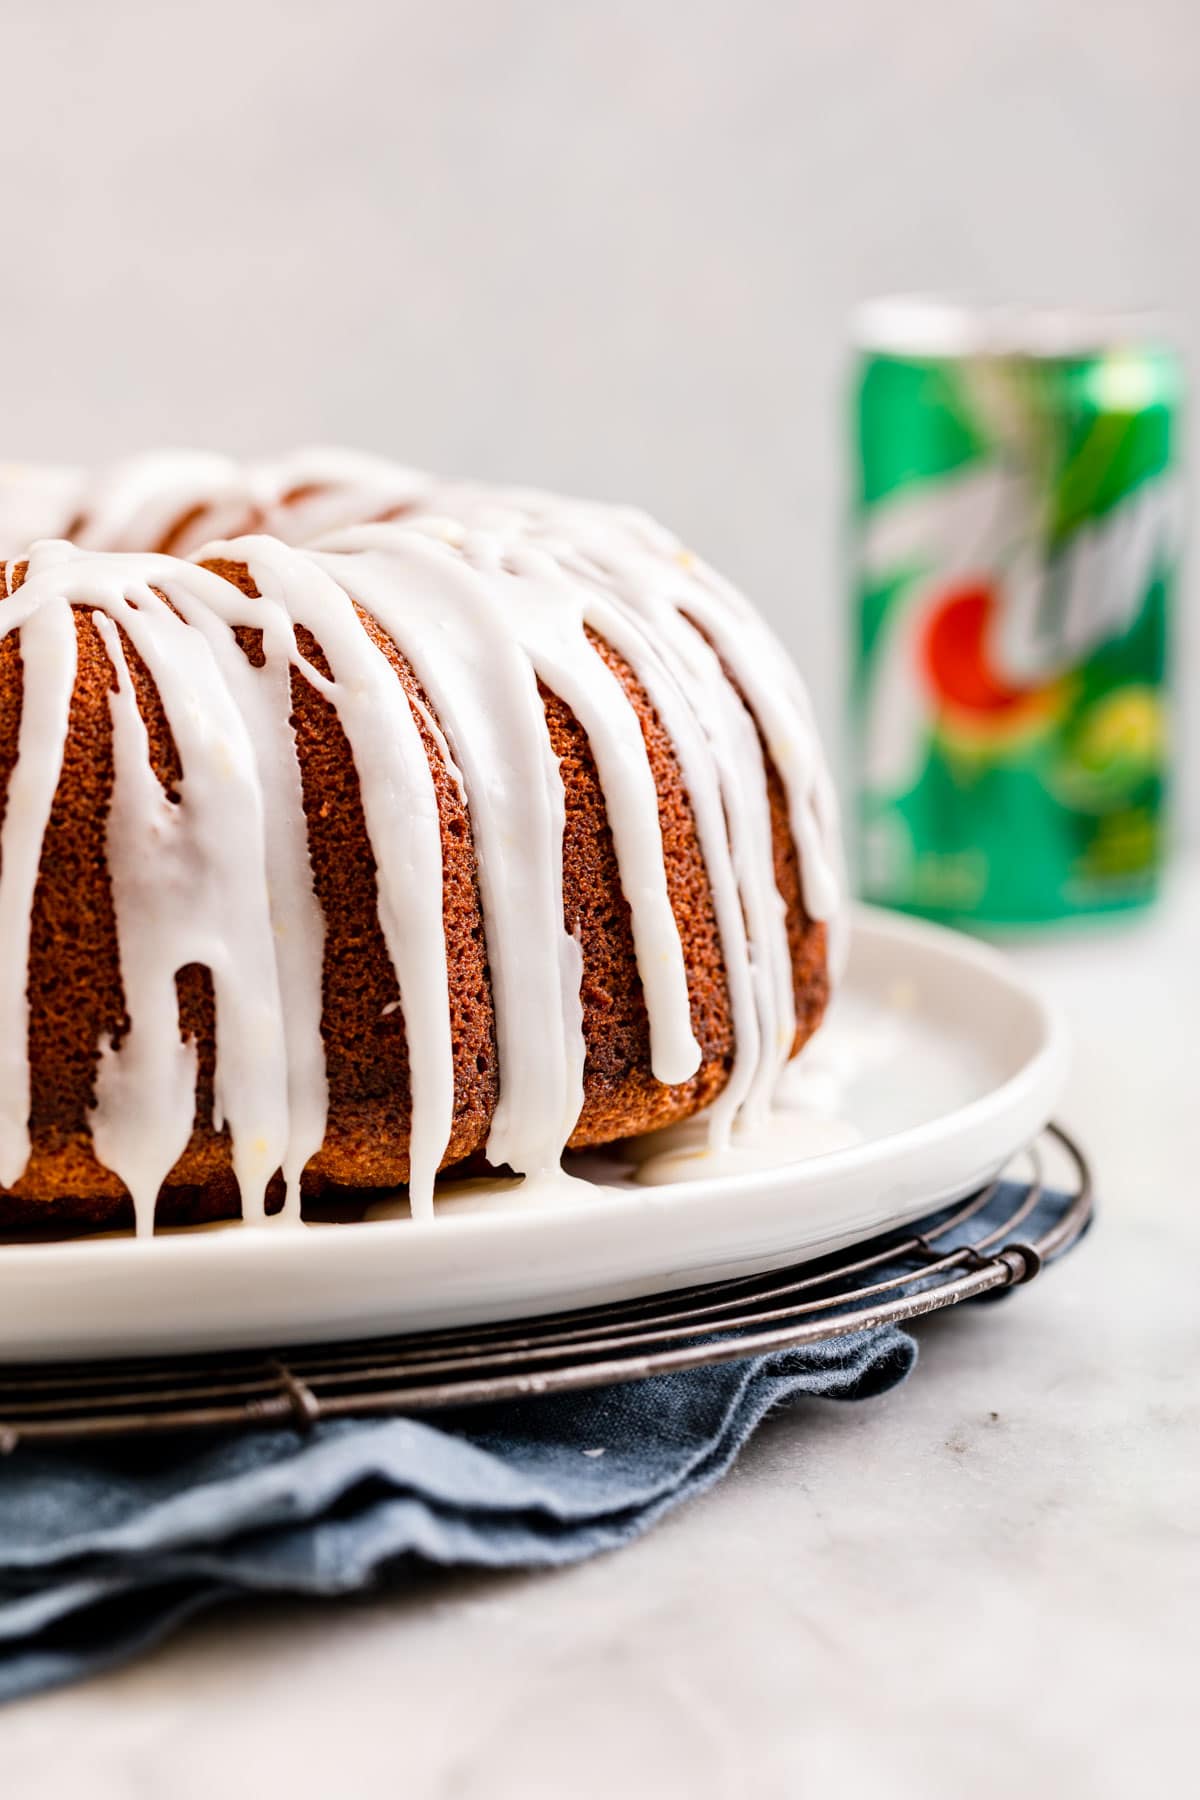 7up Pound Cake baked on plate with glaze side view